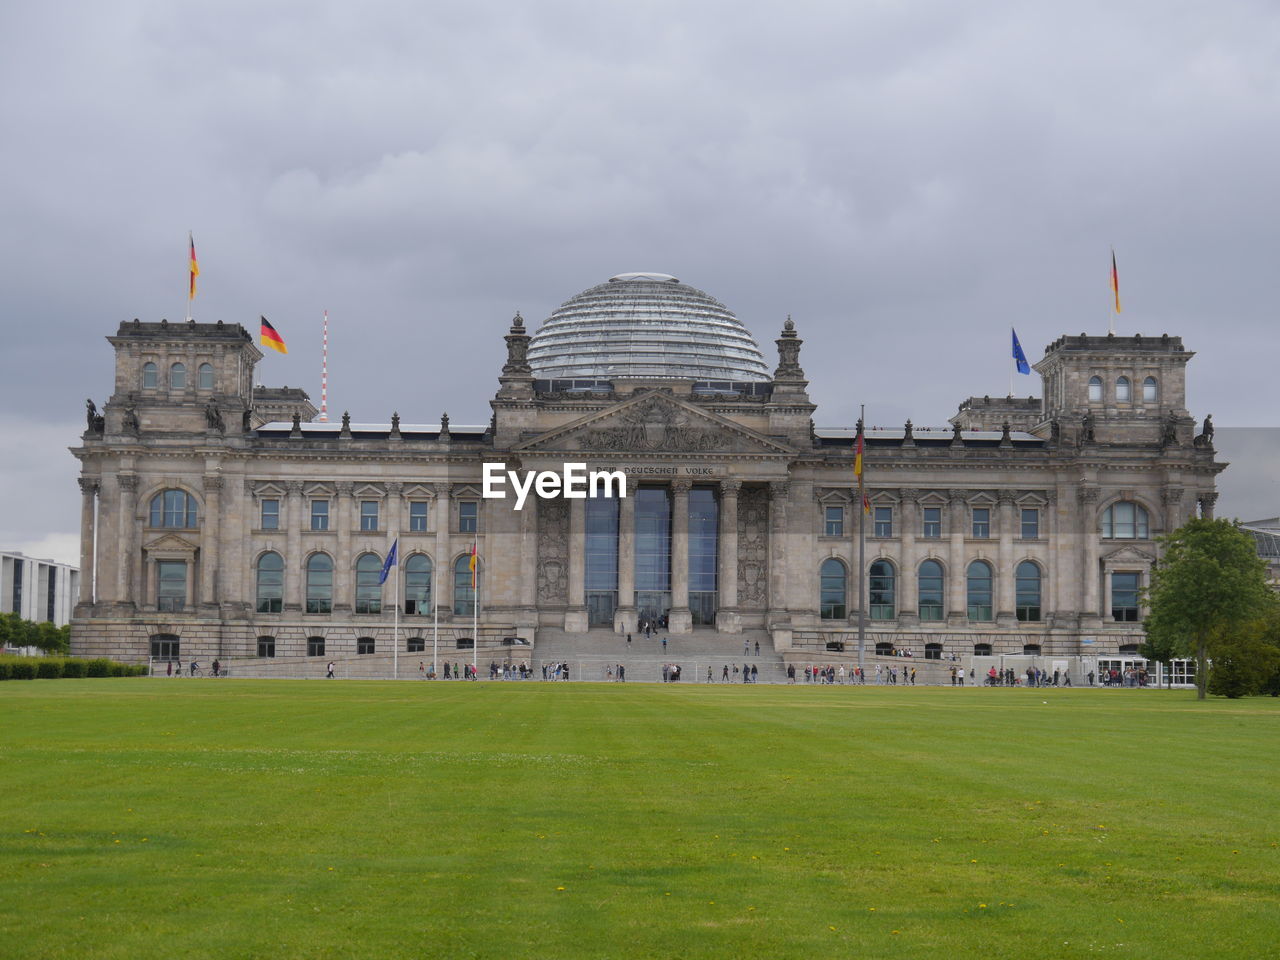 View of the reichstag in berlin.